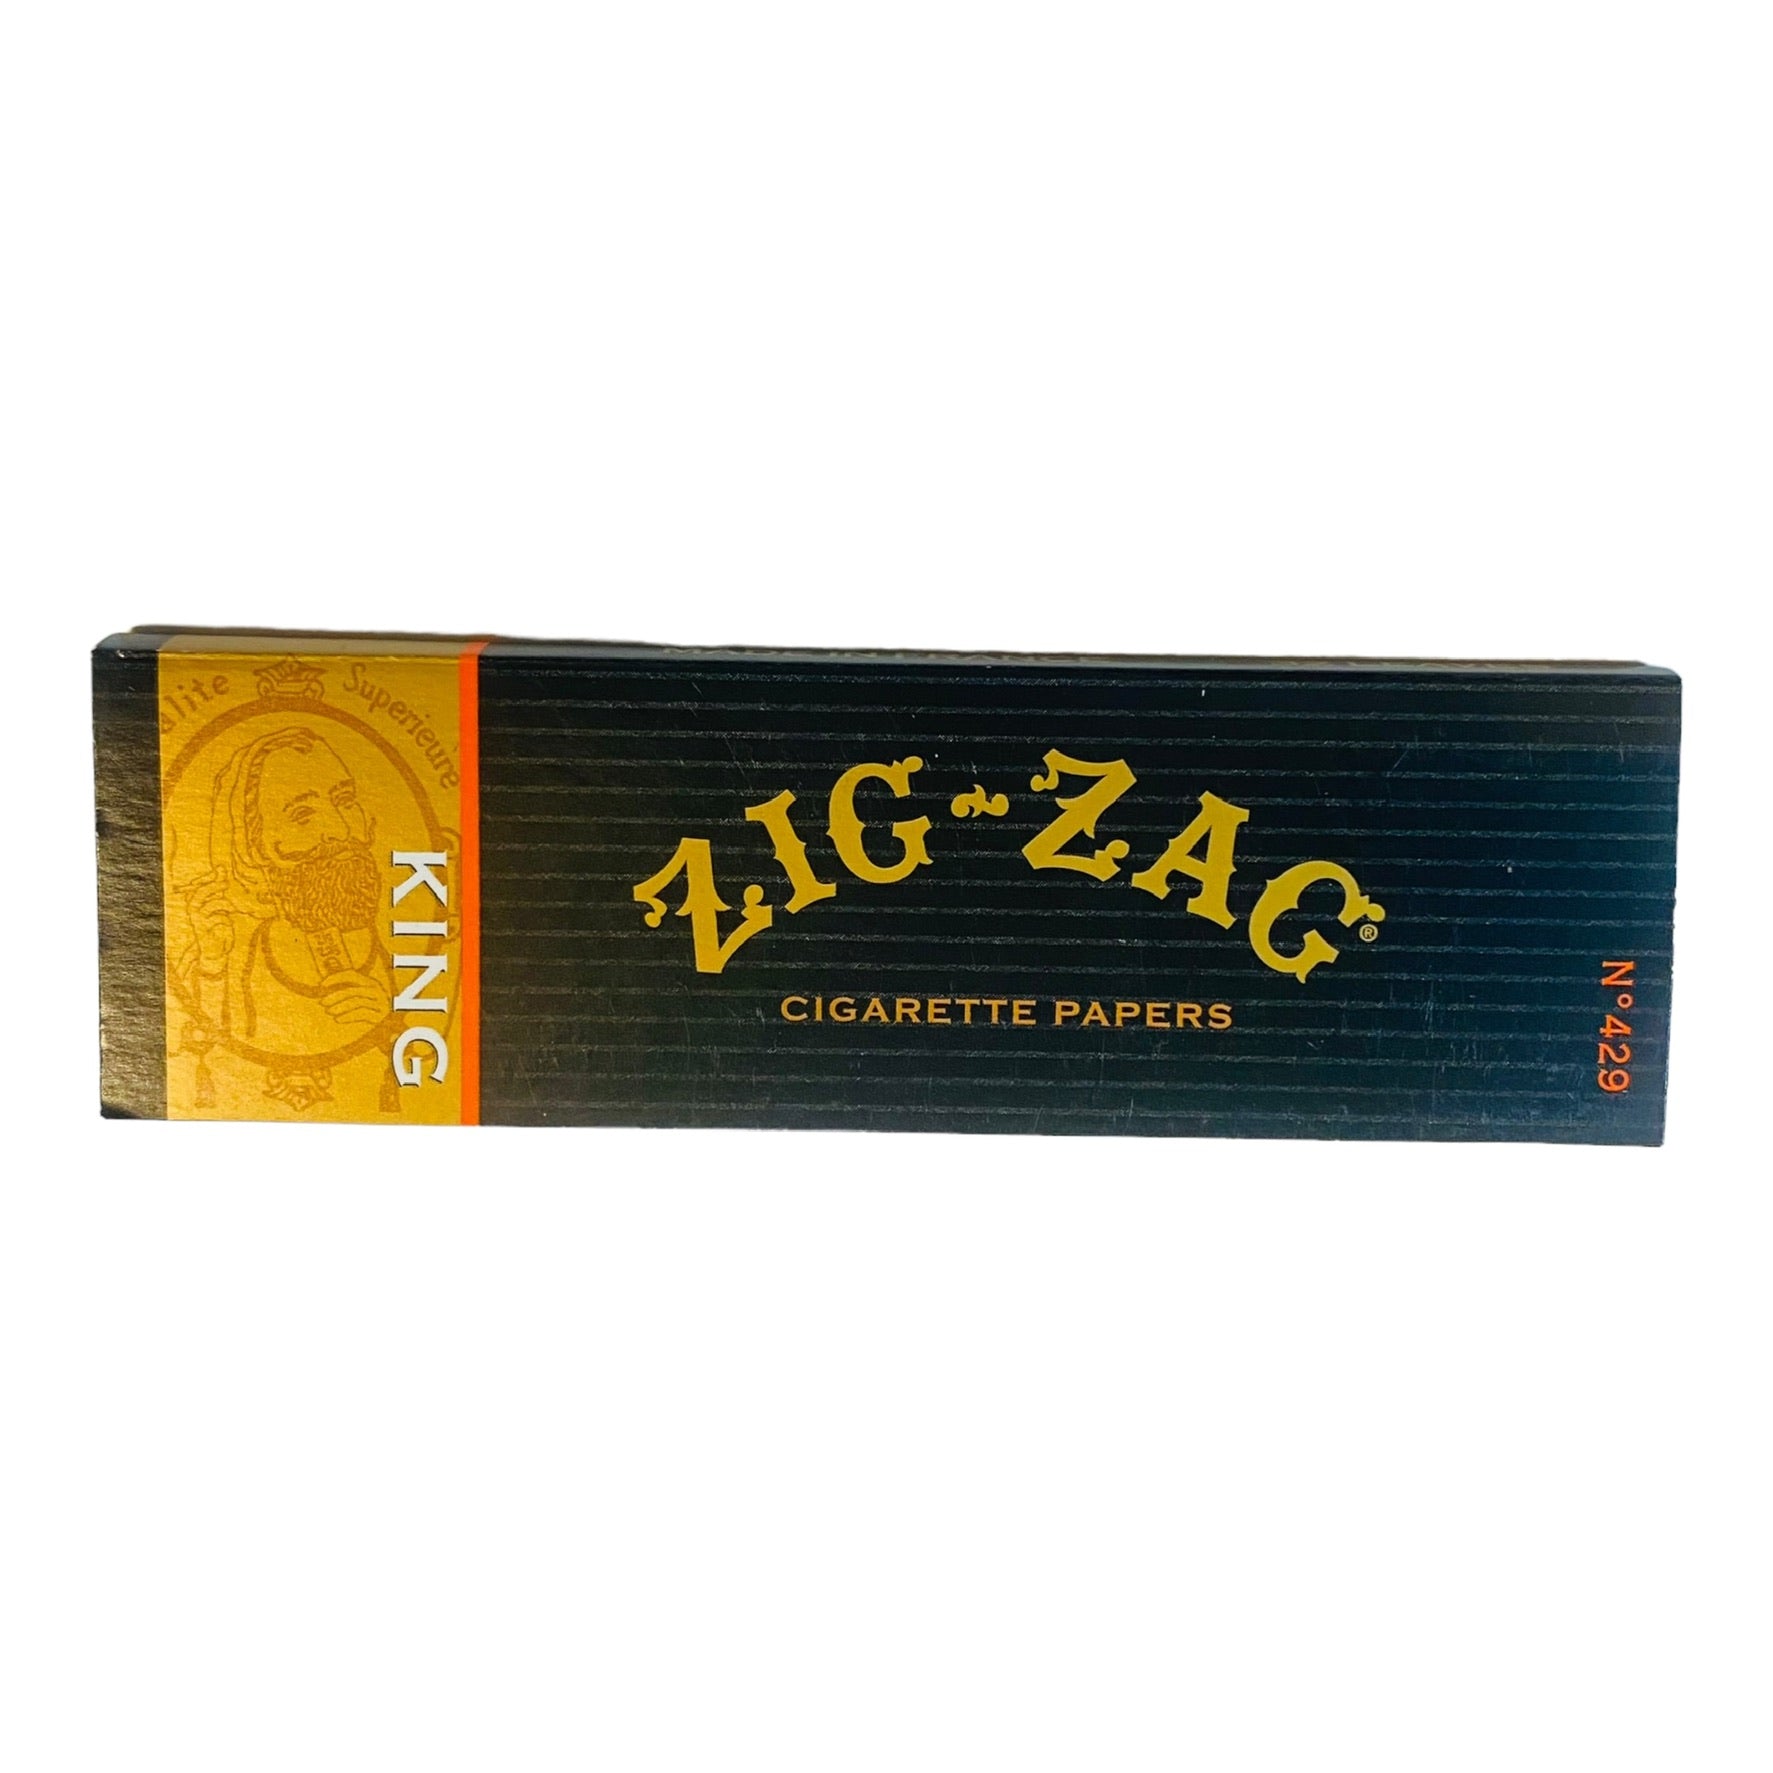 Zig Zag - King Size Papers - 4 Packs